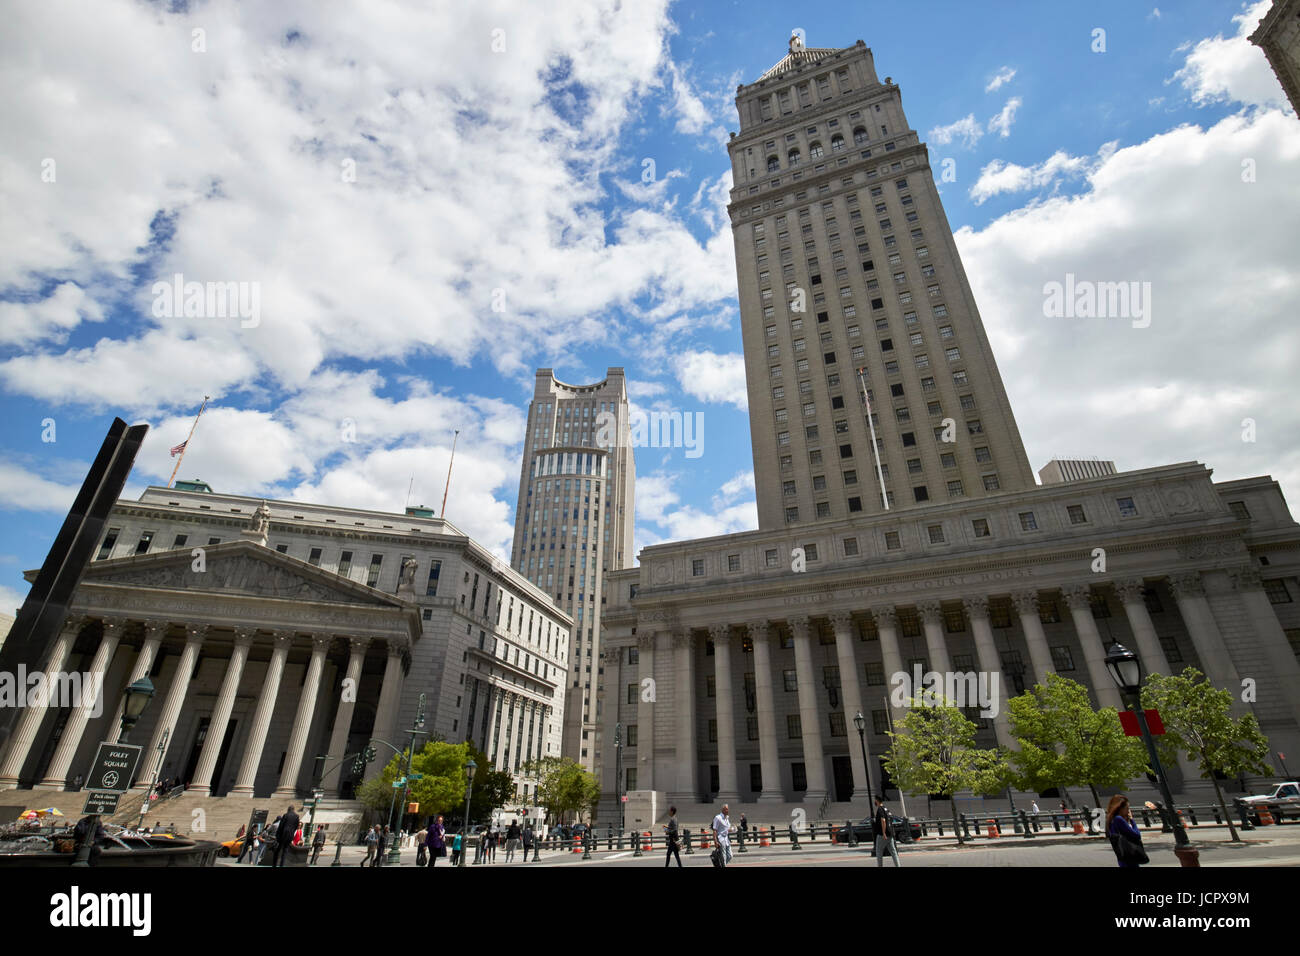 Das New York County Courthouse state Supreme Court und Thurgood Marshall U.S. Courthouse civic Center in New York City USA Stockfoto